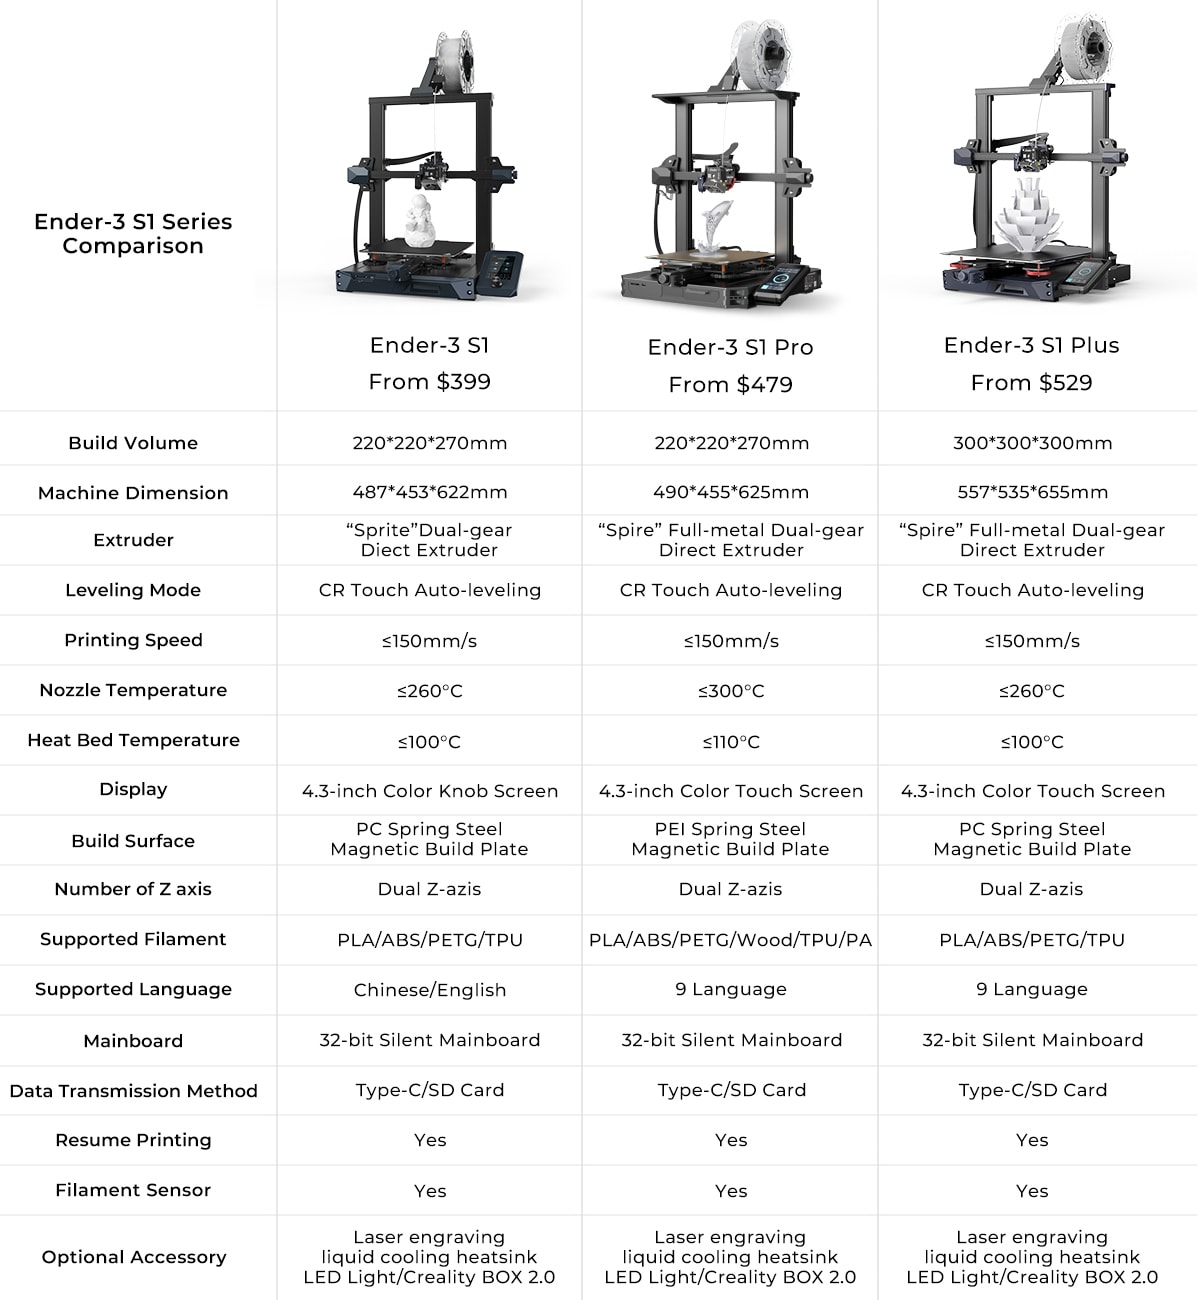 A comparison of the Ender 3 S1, S1 Pro, and S1 Plus